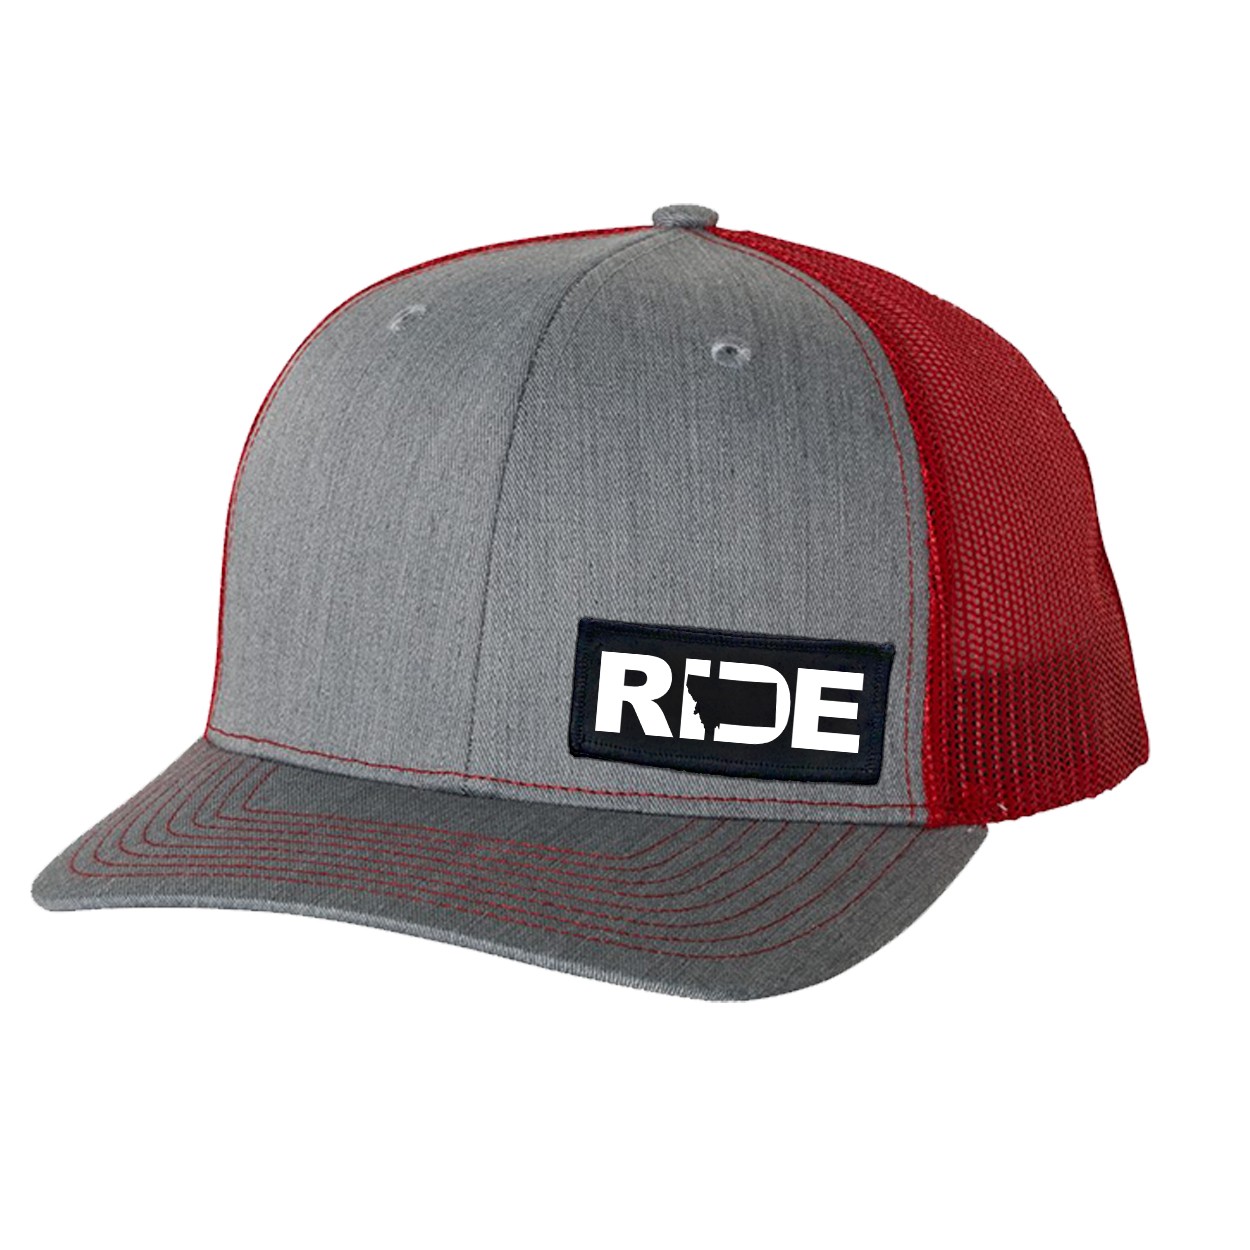 Ride Montana Night Out Woven Patch Snapback Trucker Hat Heather Heather Grey/Red (White Logo)